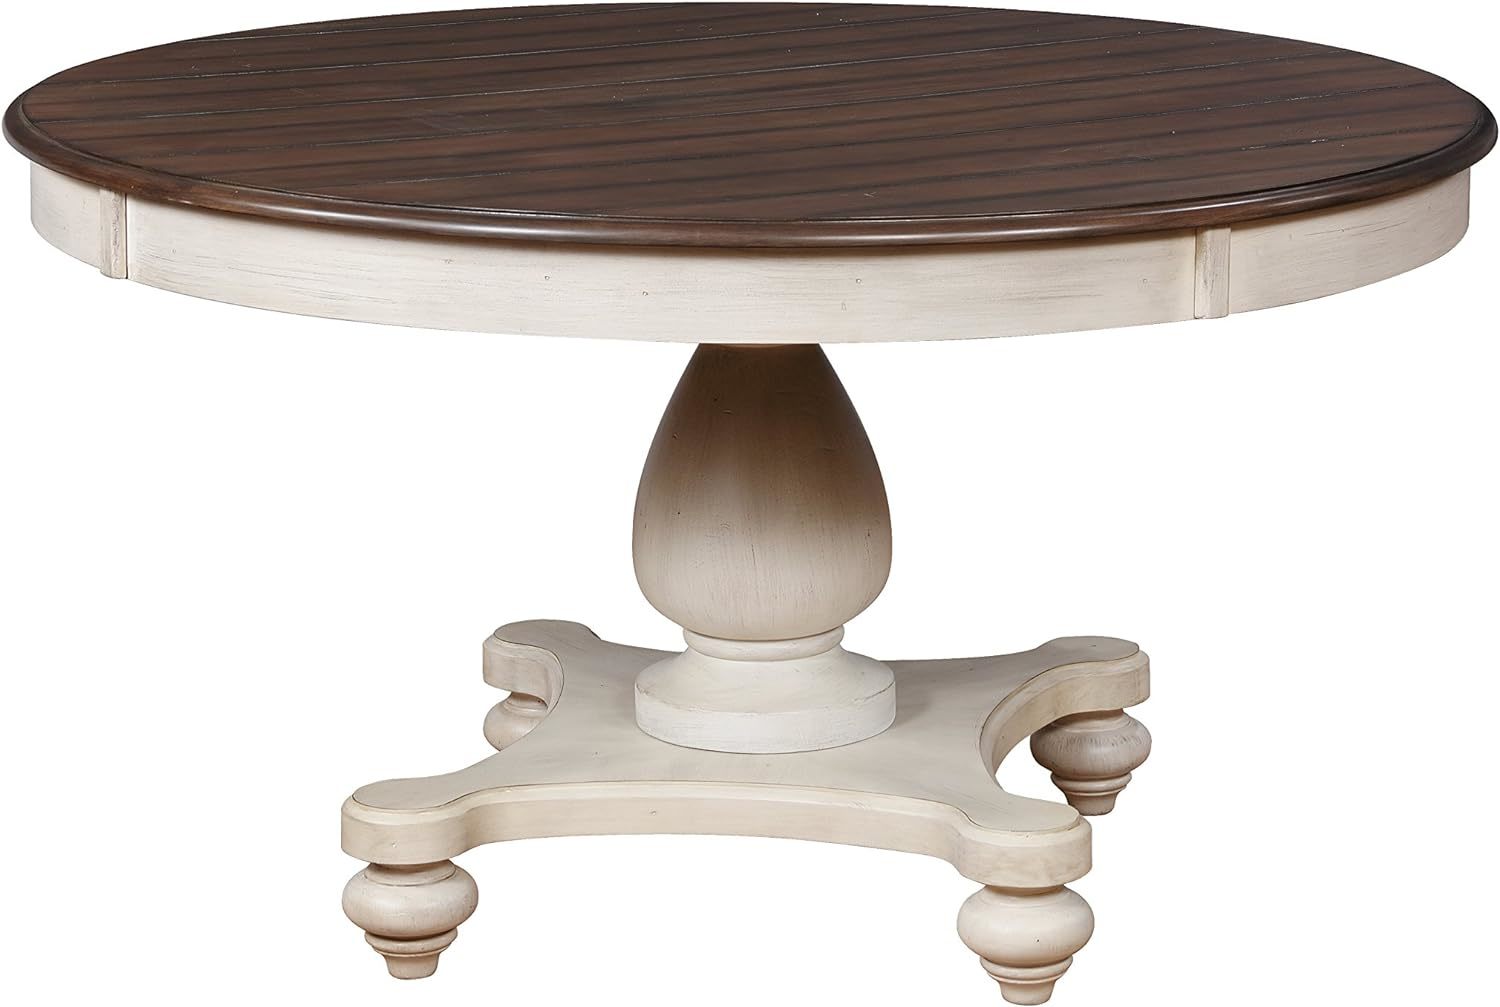 Roundhill Furniture Arch Weathered Round Dining Table Pedastal Base, Multicolor. - $705.92